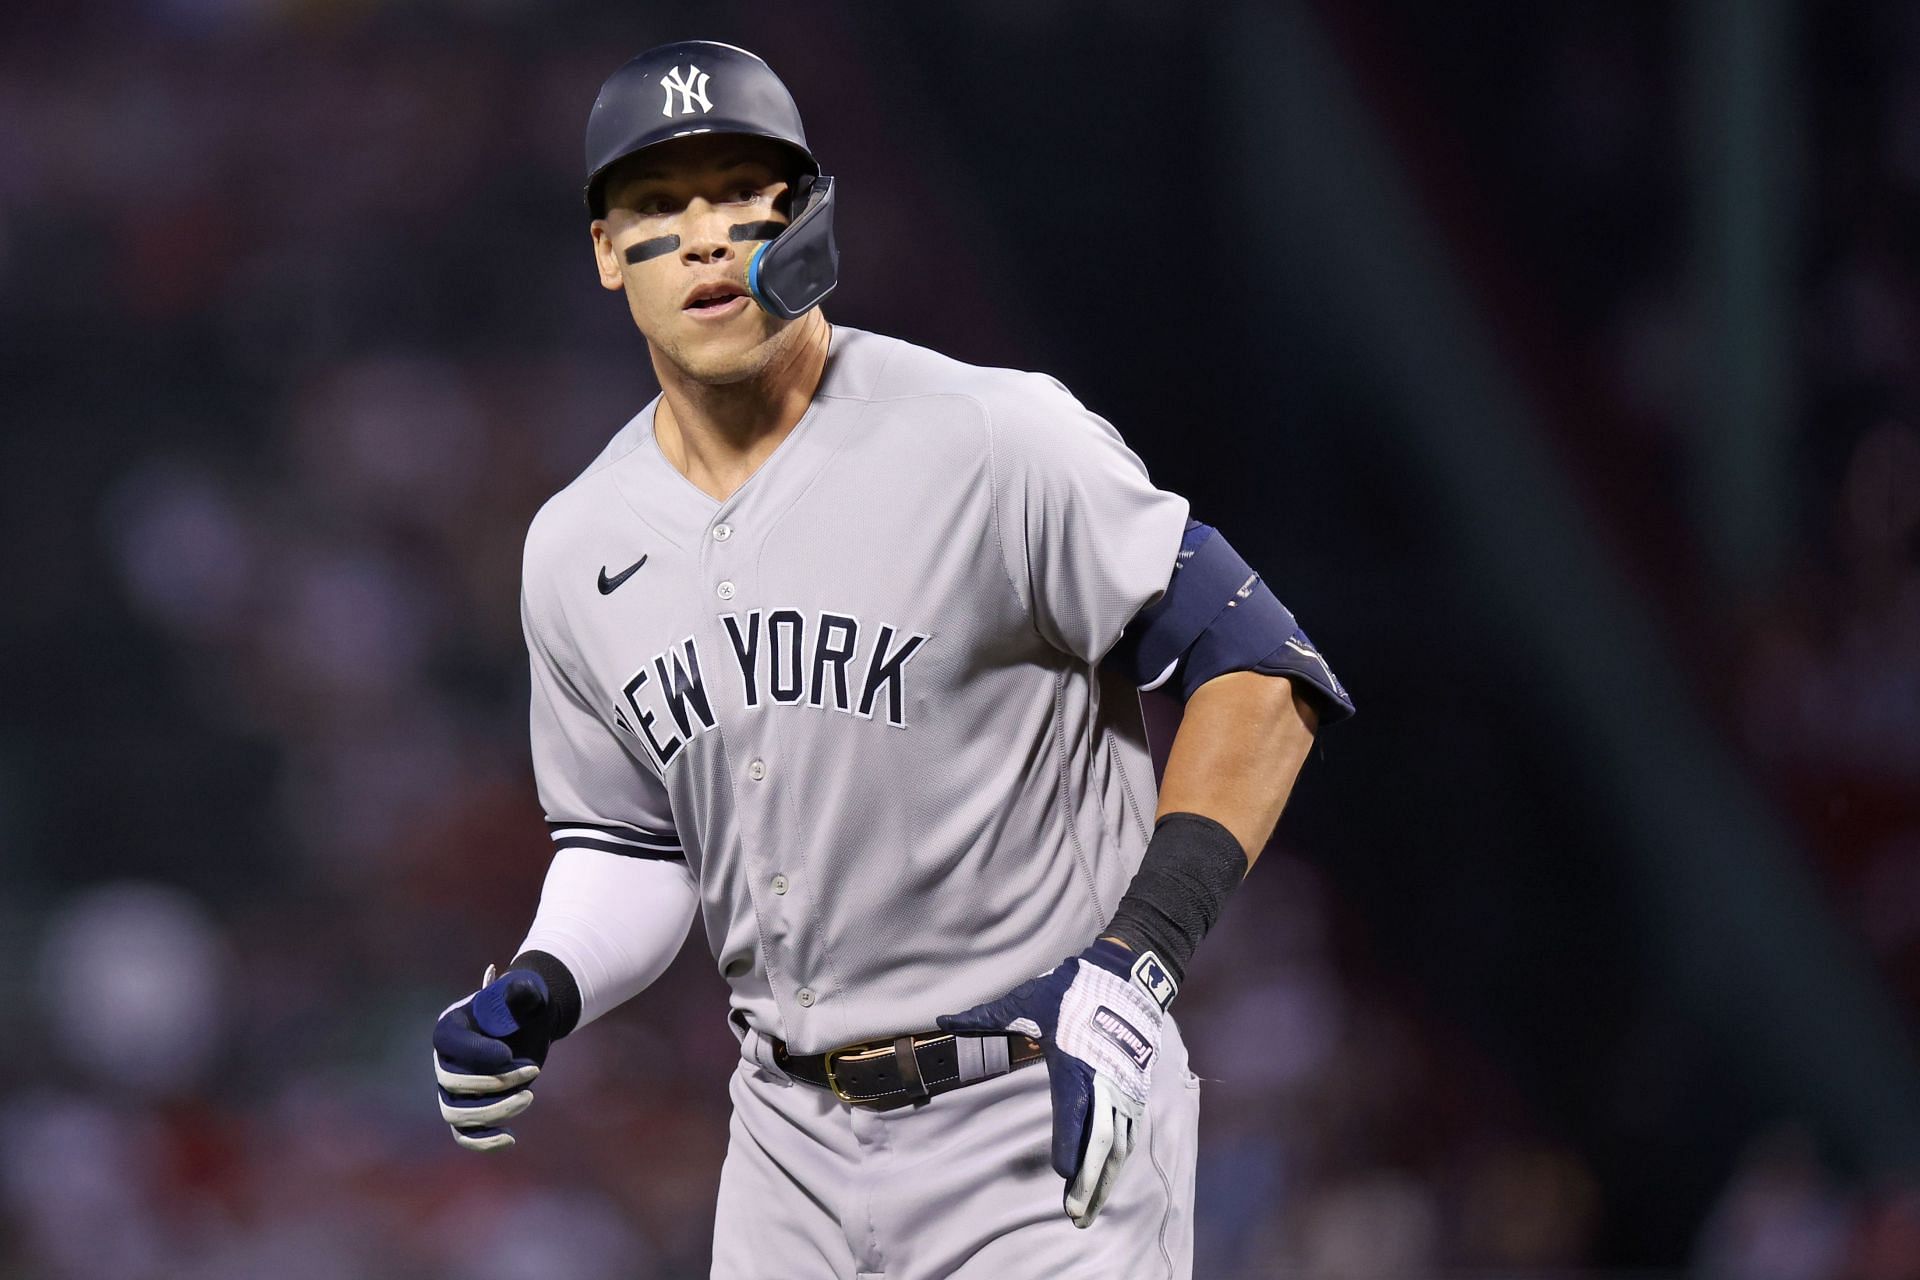 Aaron Judge had more 110+ MPH batted balls today than the San